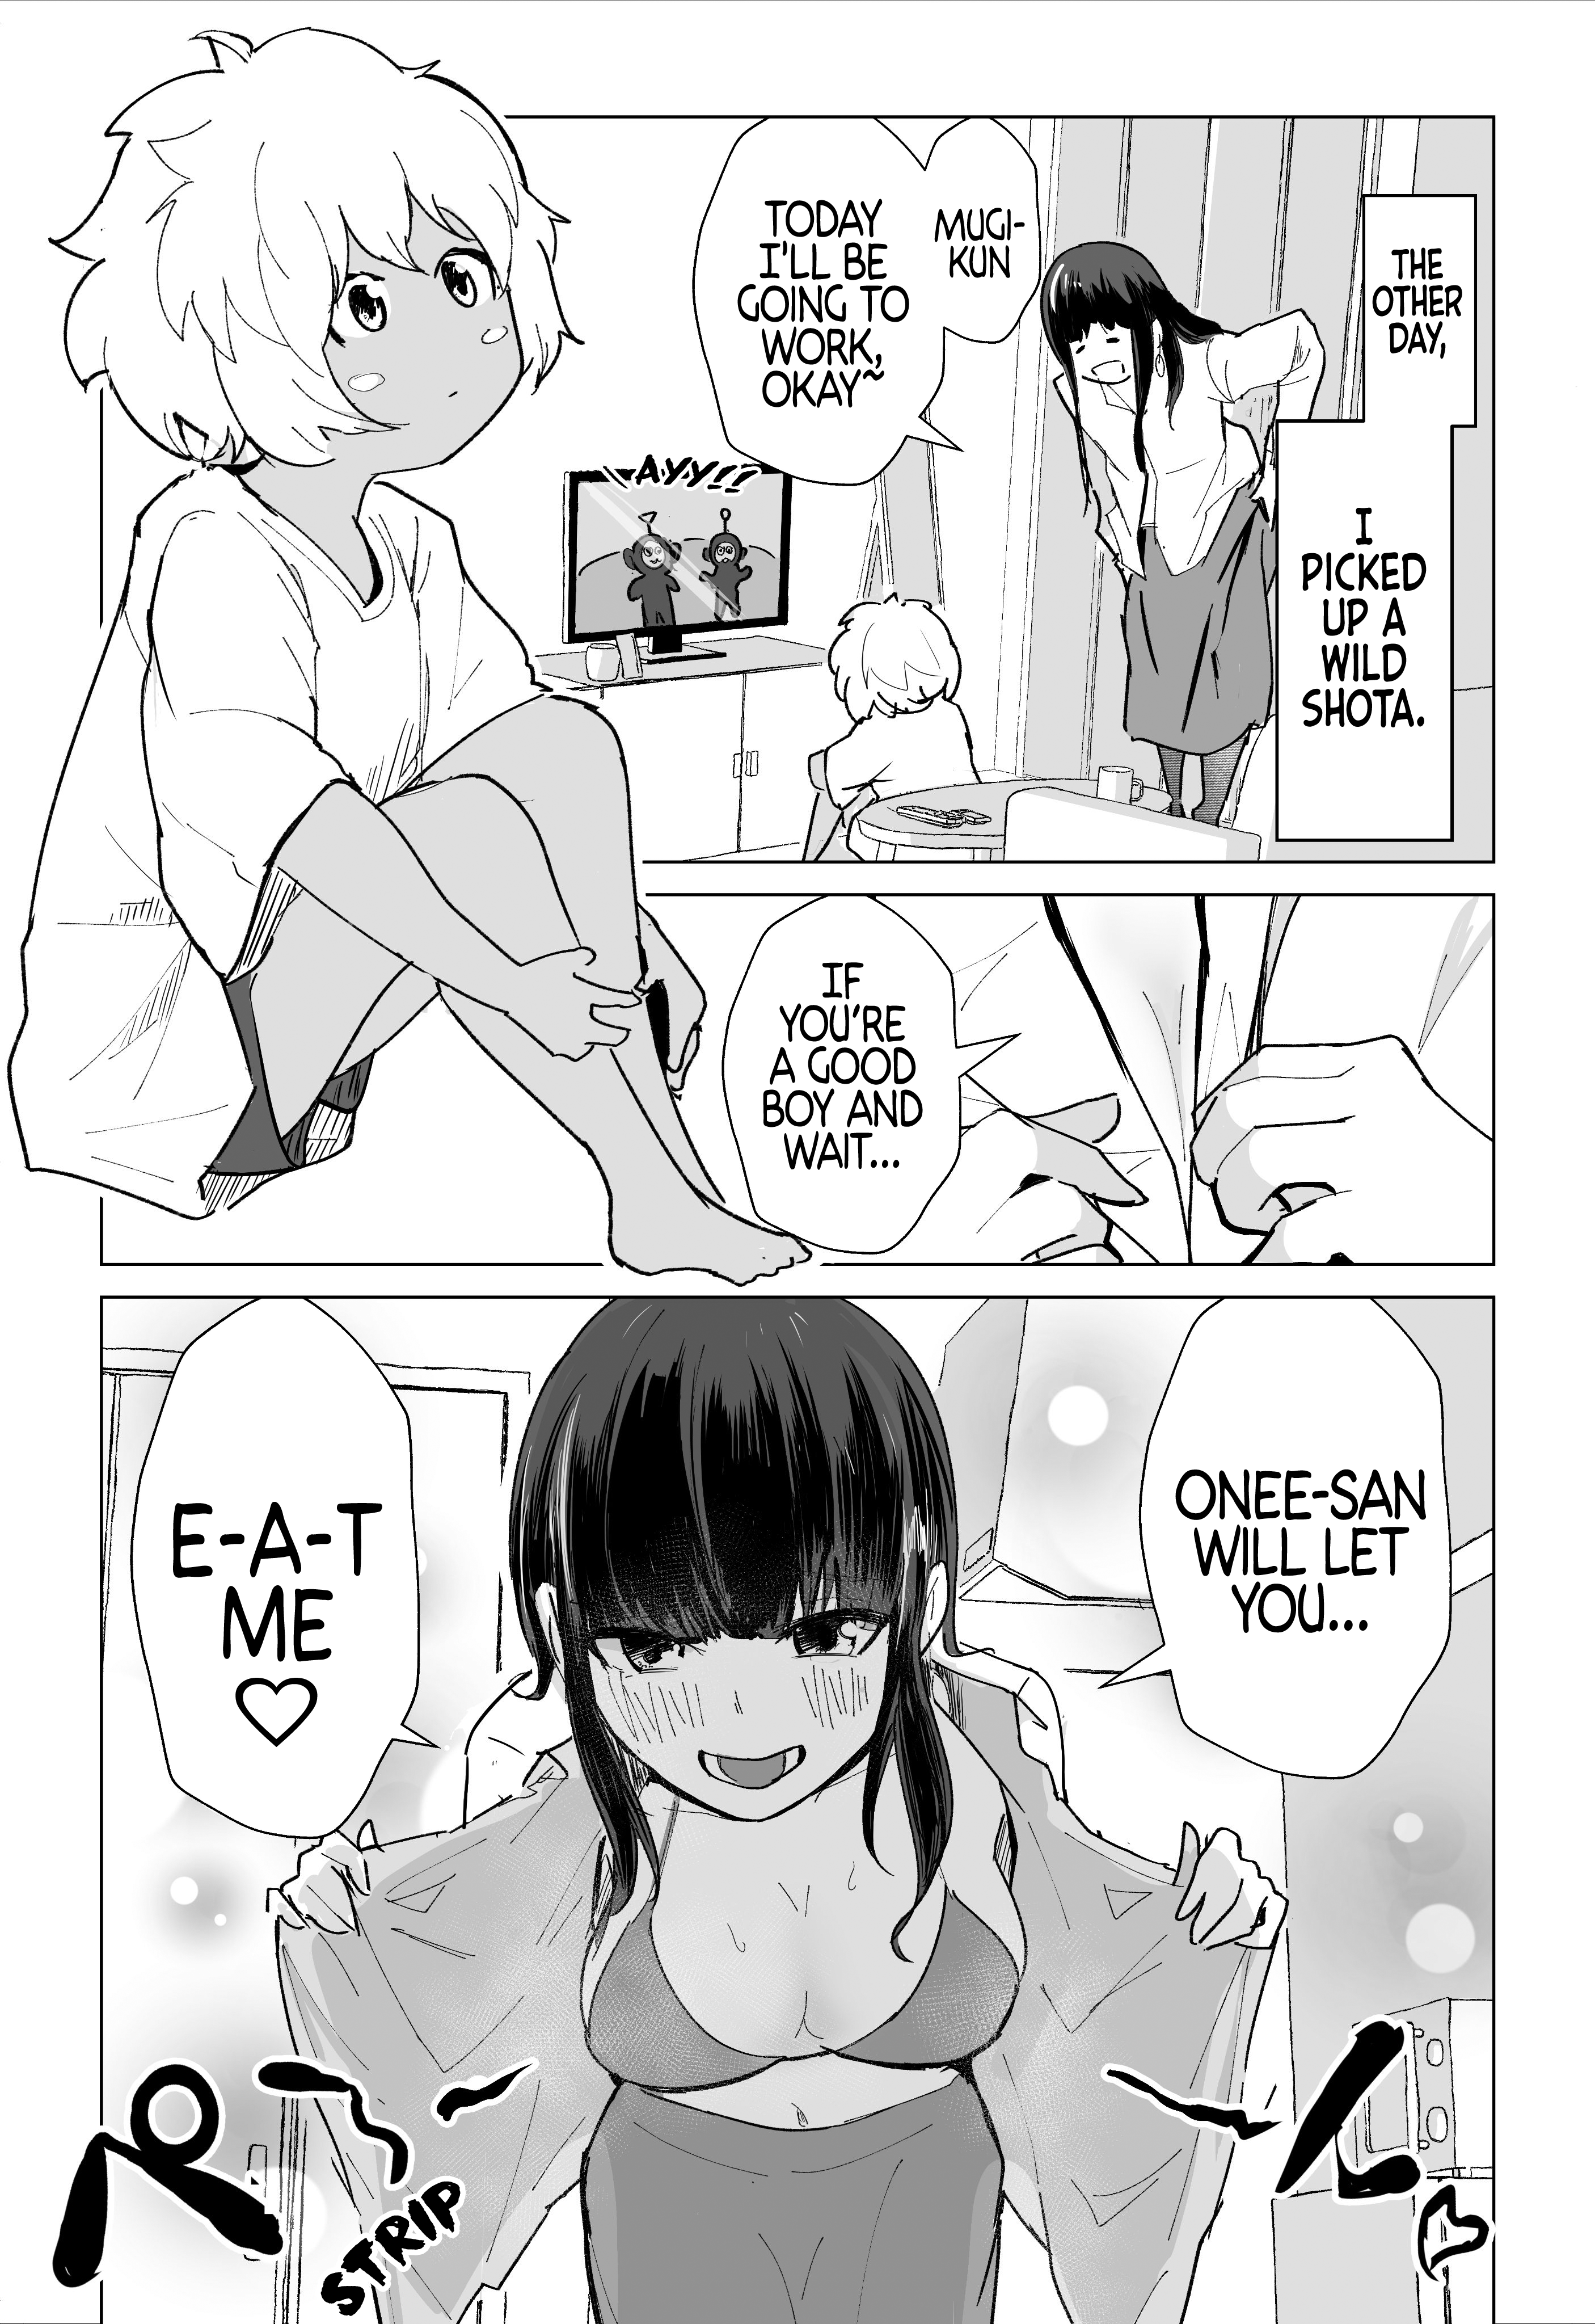 The Office-Lady Who Took In A Wild Shota - chapter 3 - #1